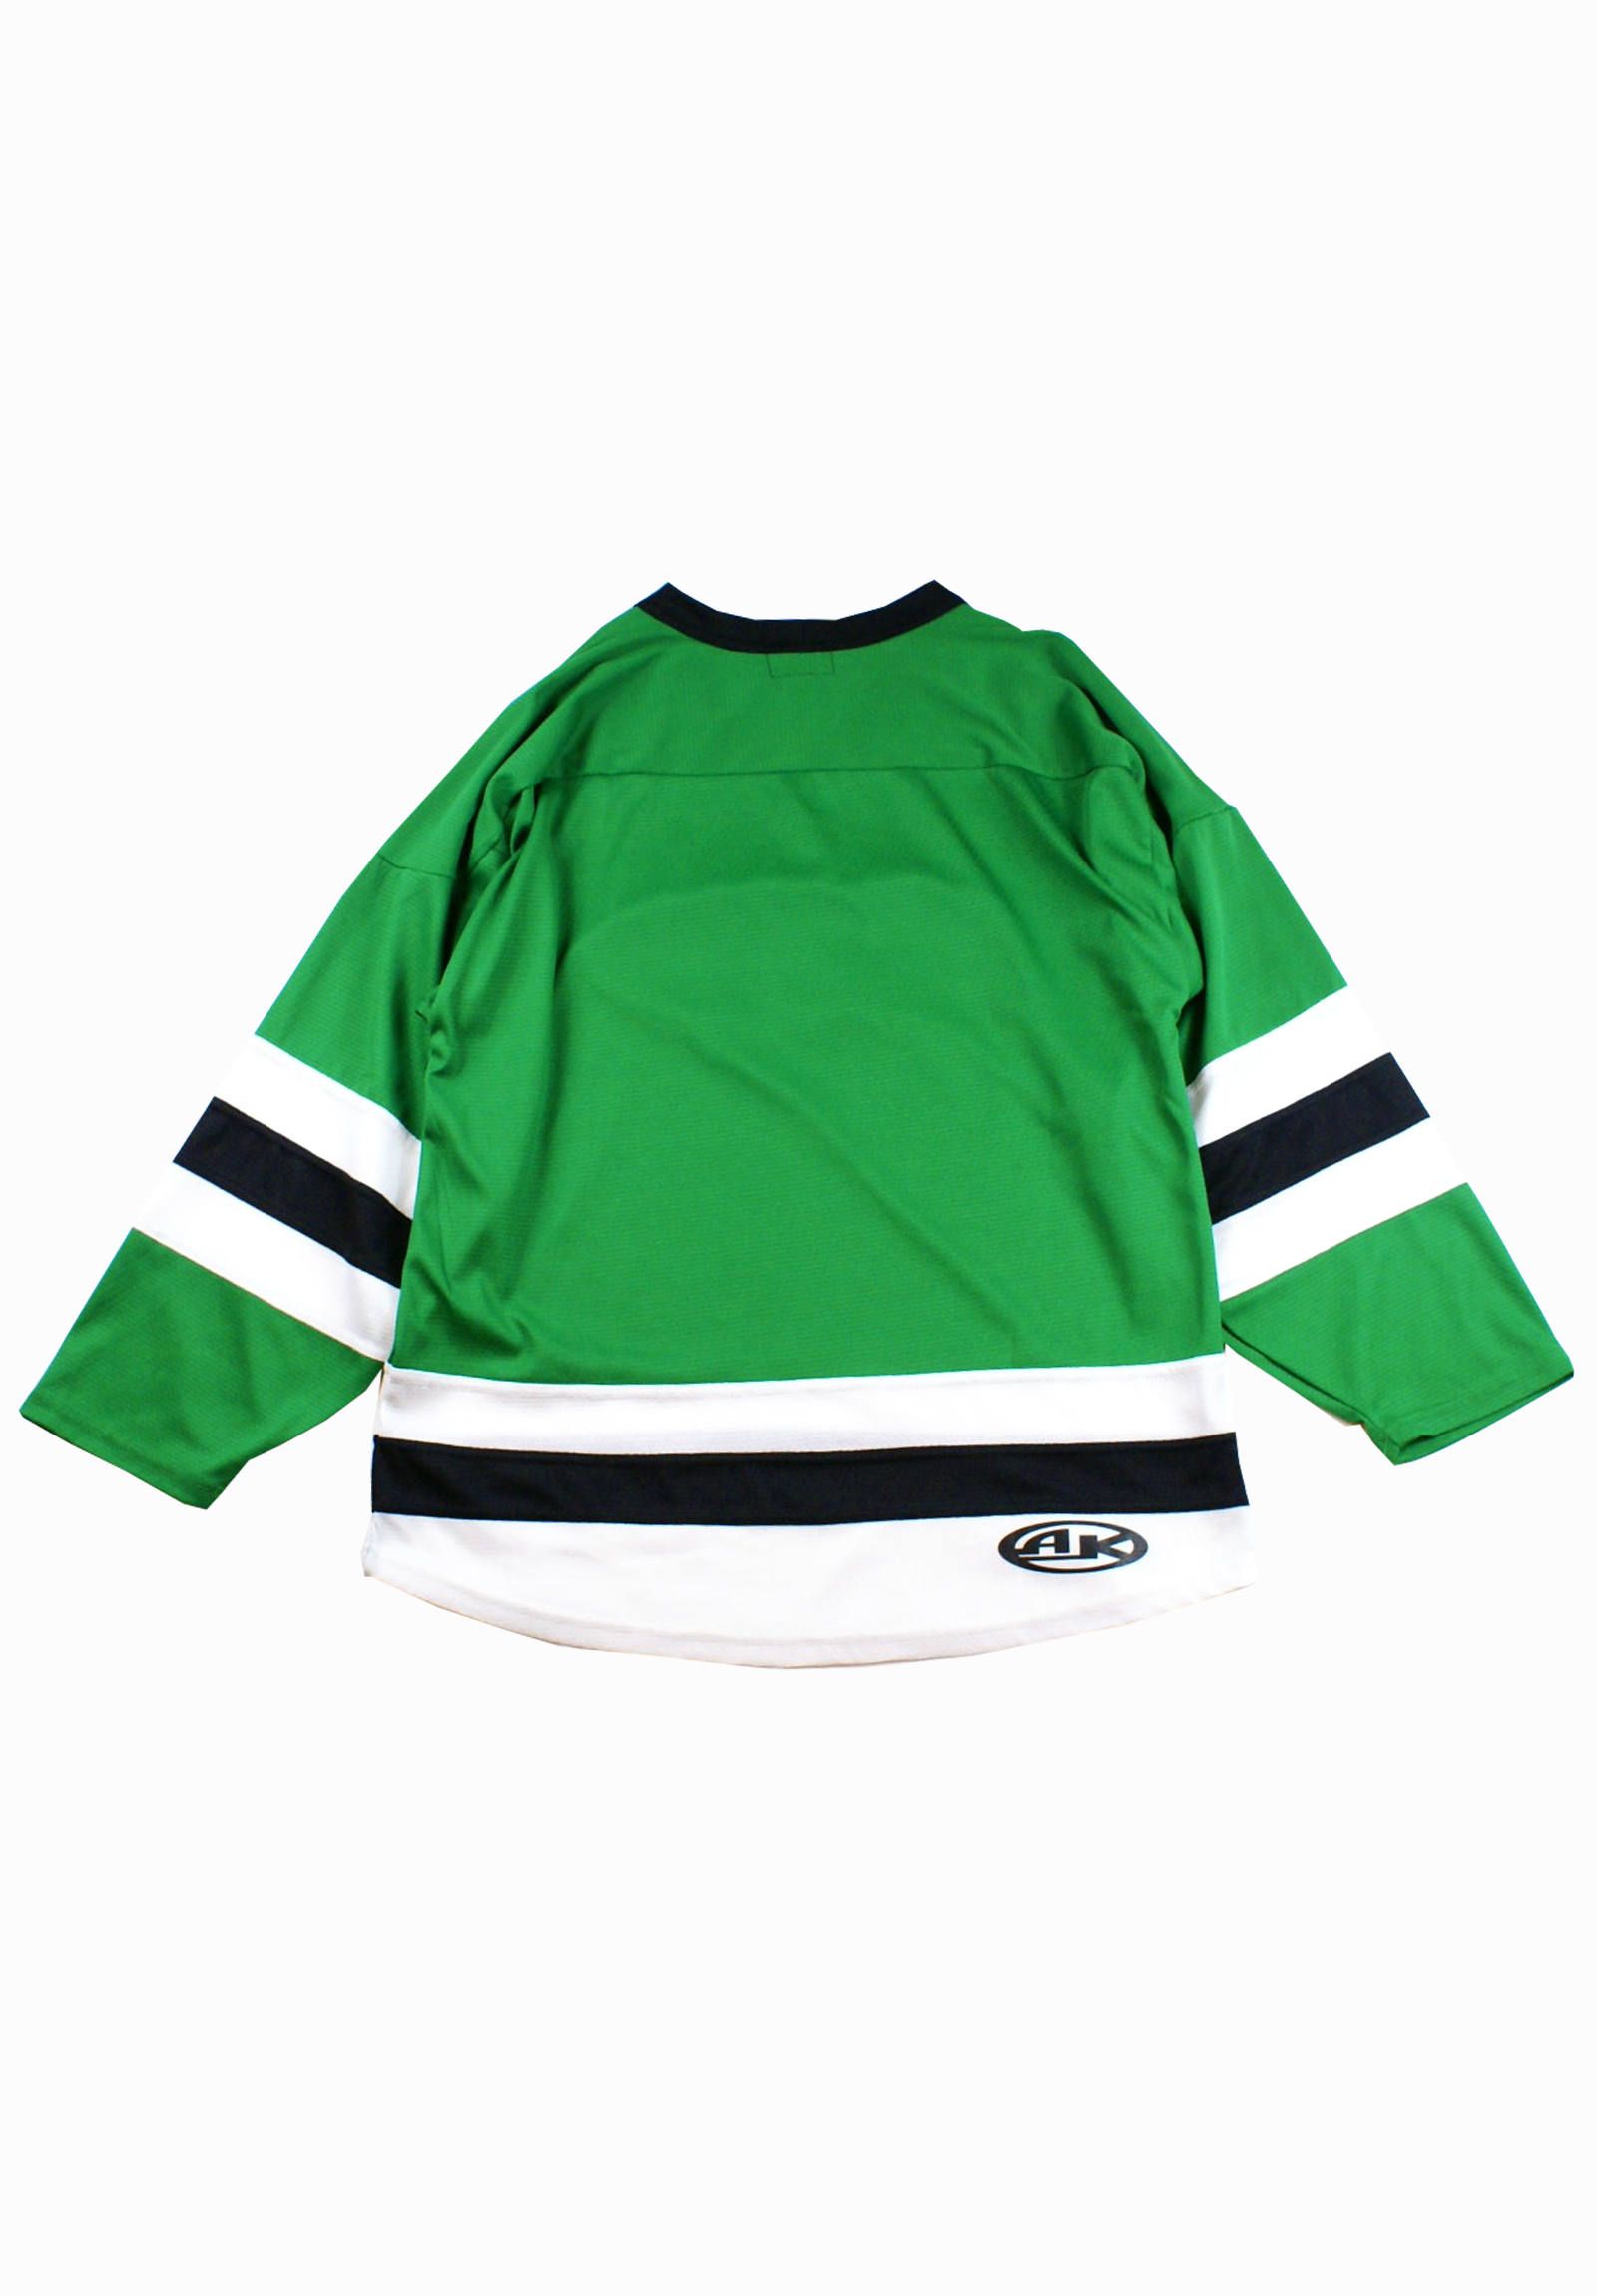 The Decades - ホッケージャージ Oval Logo Jersey -Green- | FROG's TAIL